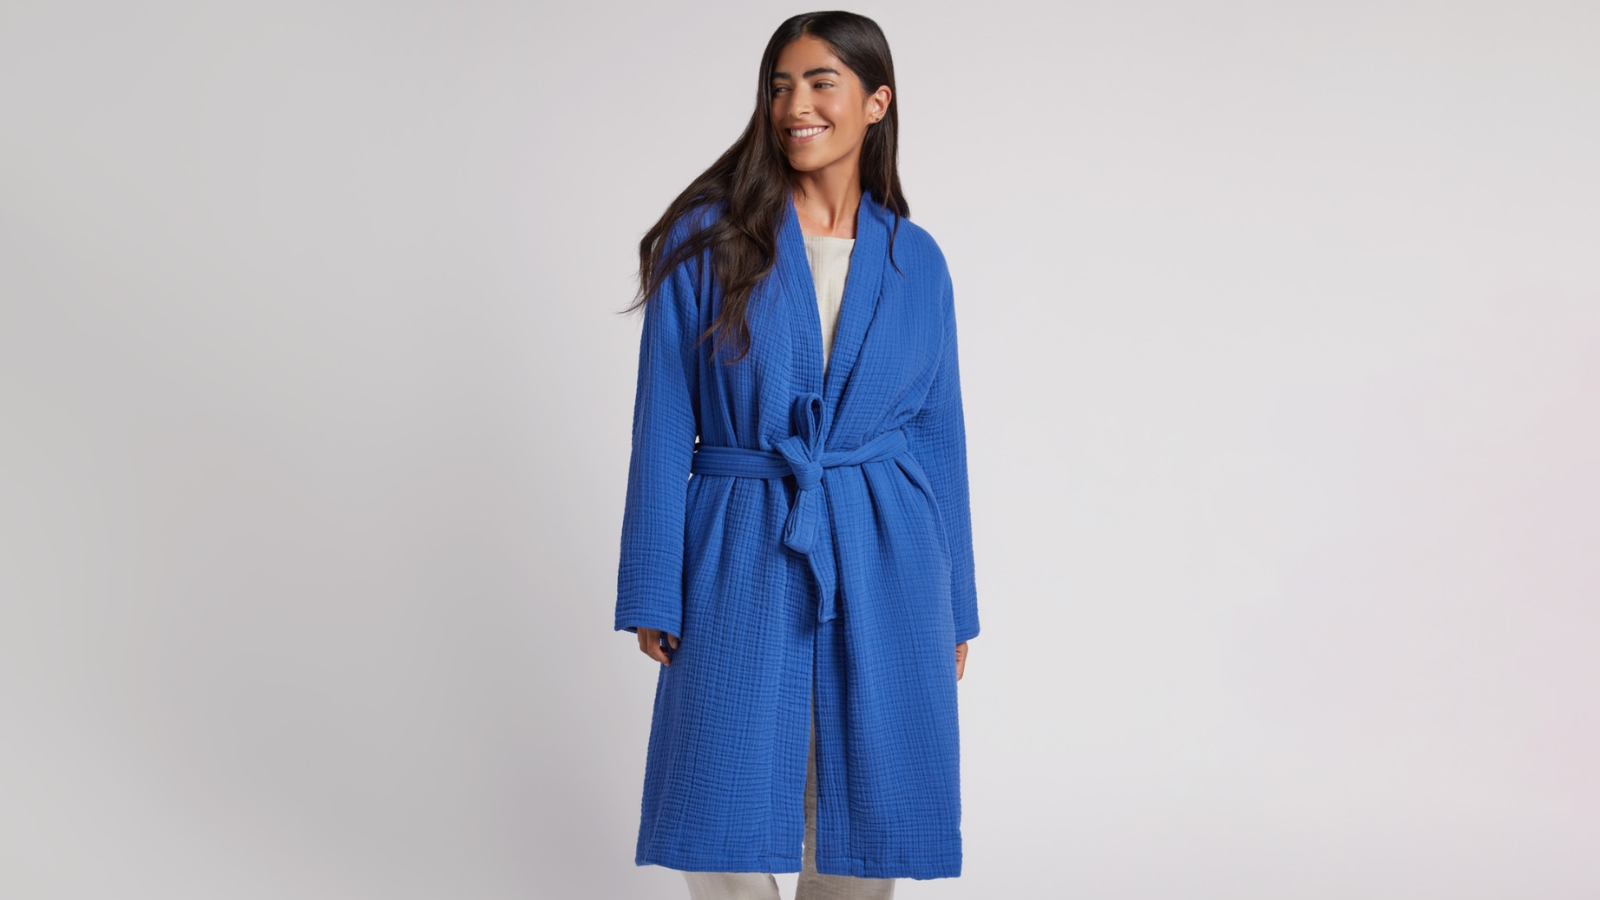 women wearing a cobalt color cotton robe and smiling